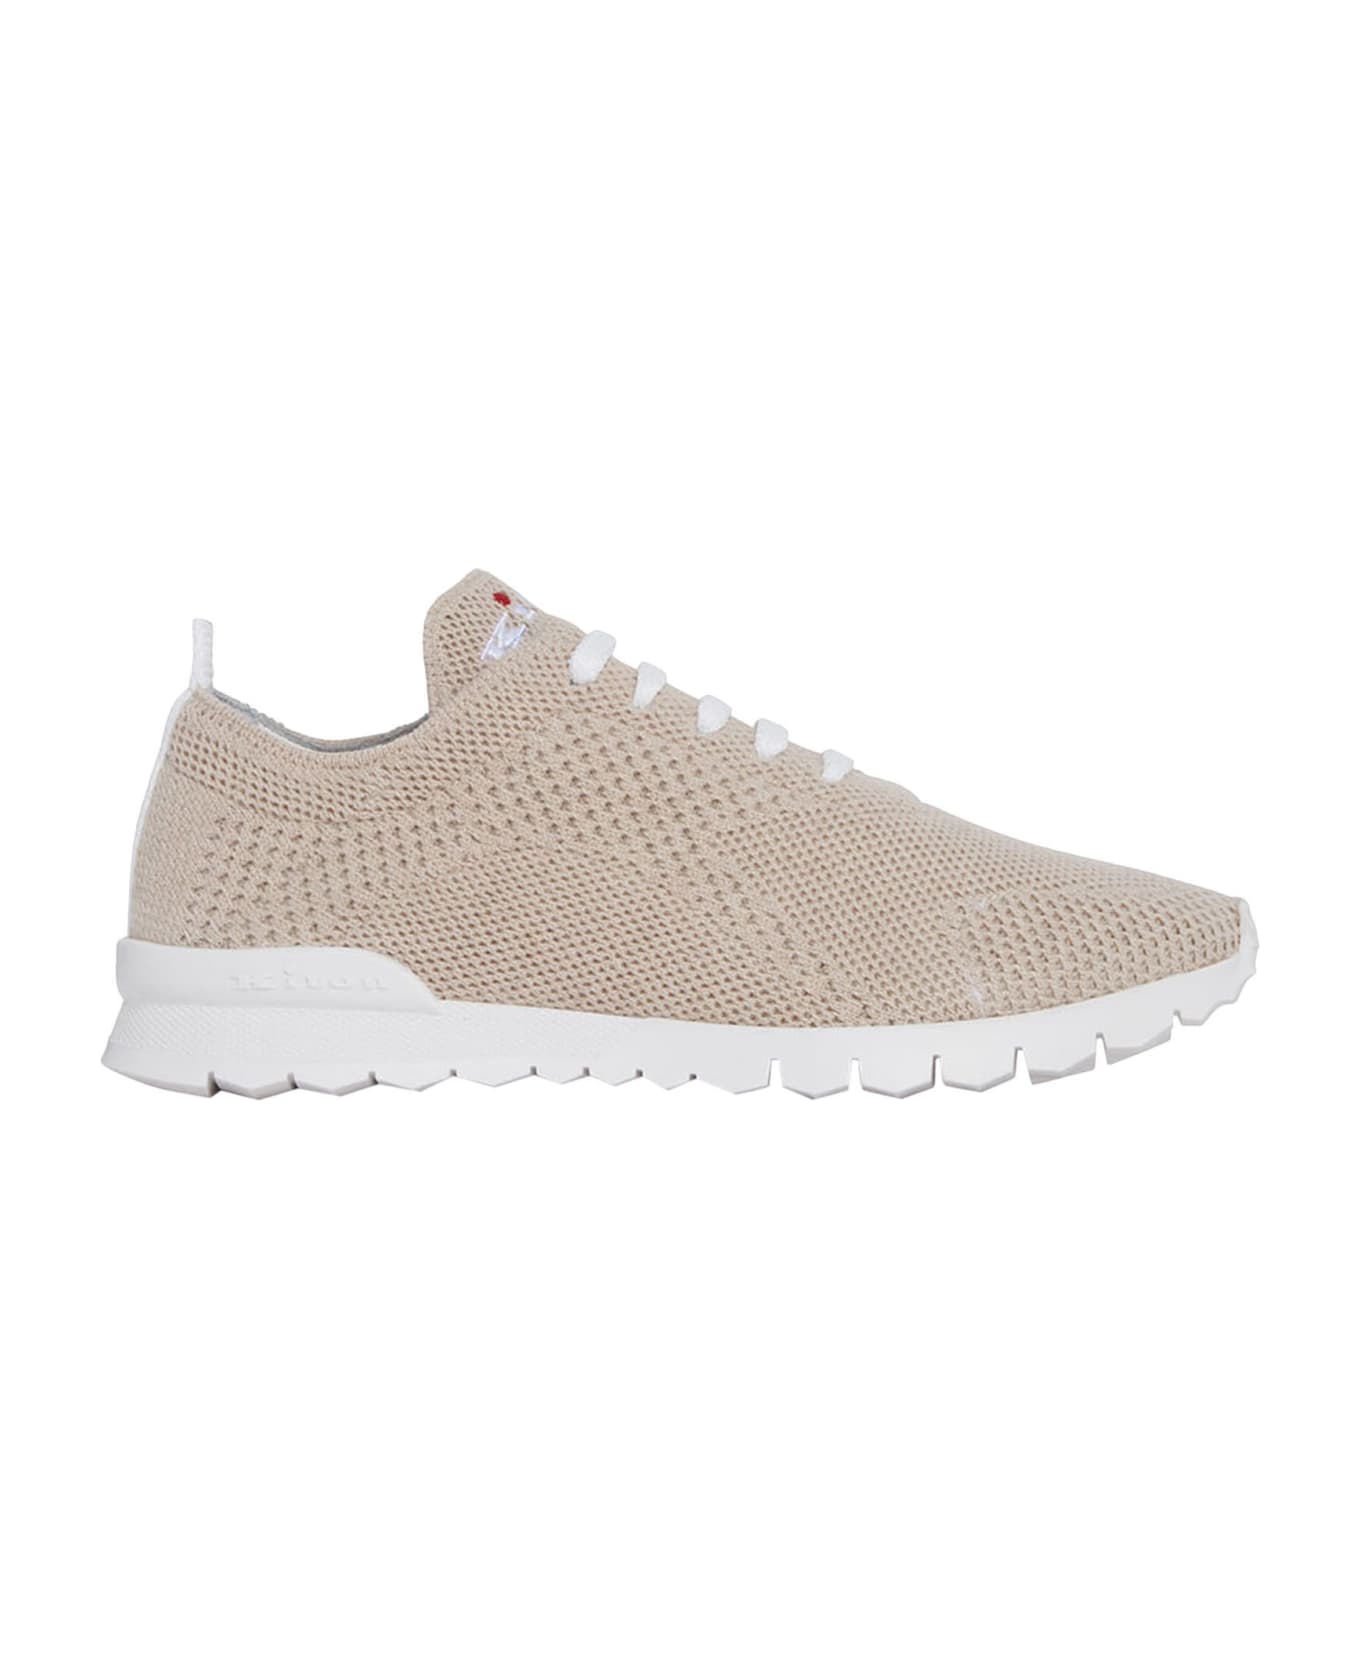 Kiton Fits - Sneakers Shoes Cashmere - BEIGE